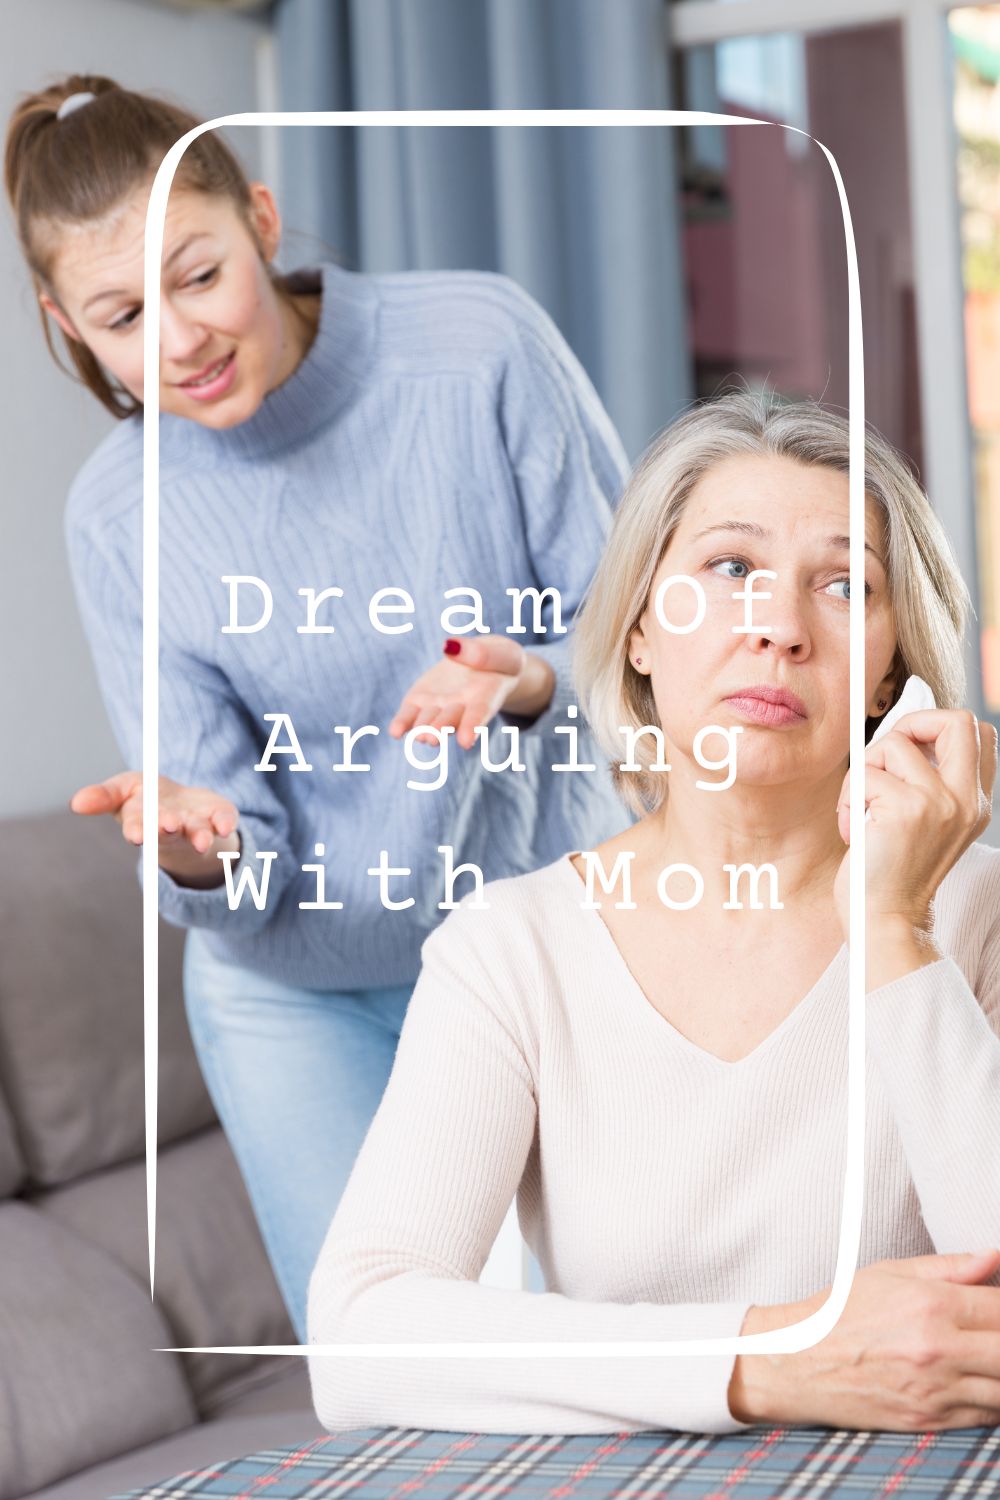 Dream Of Arguing With Mom Meanings 2